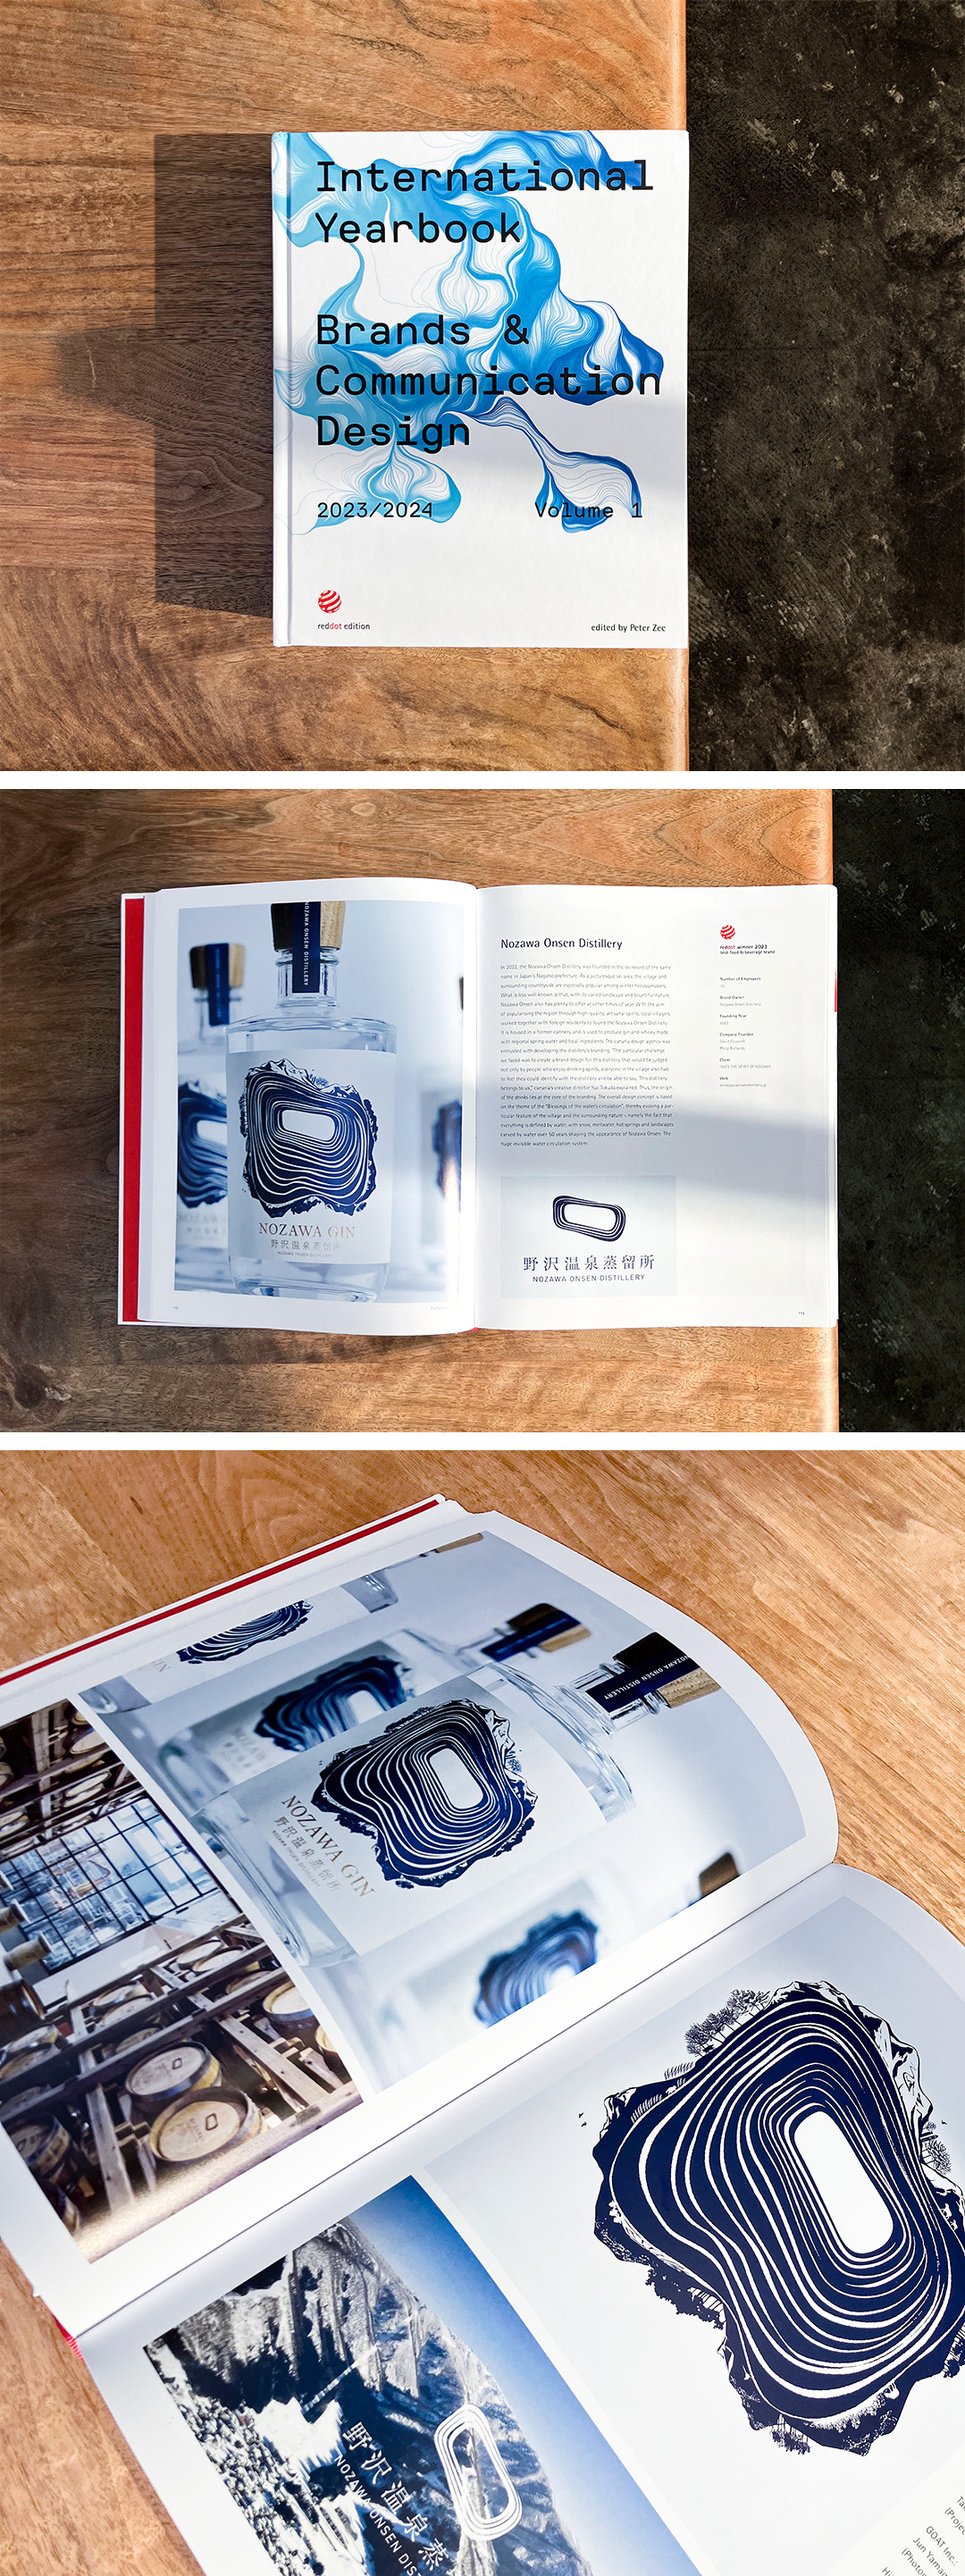 red dot design year book 2012/2013デザイン本-